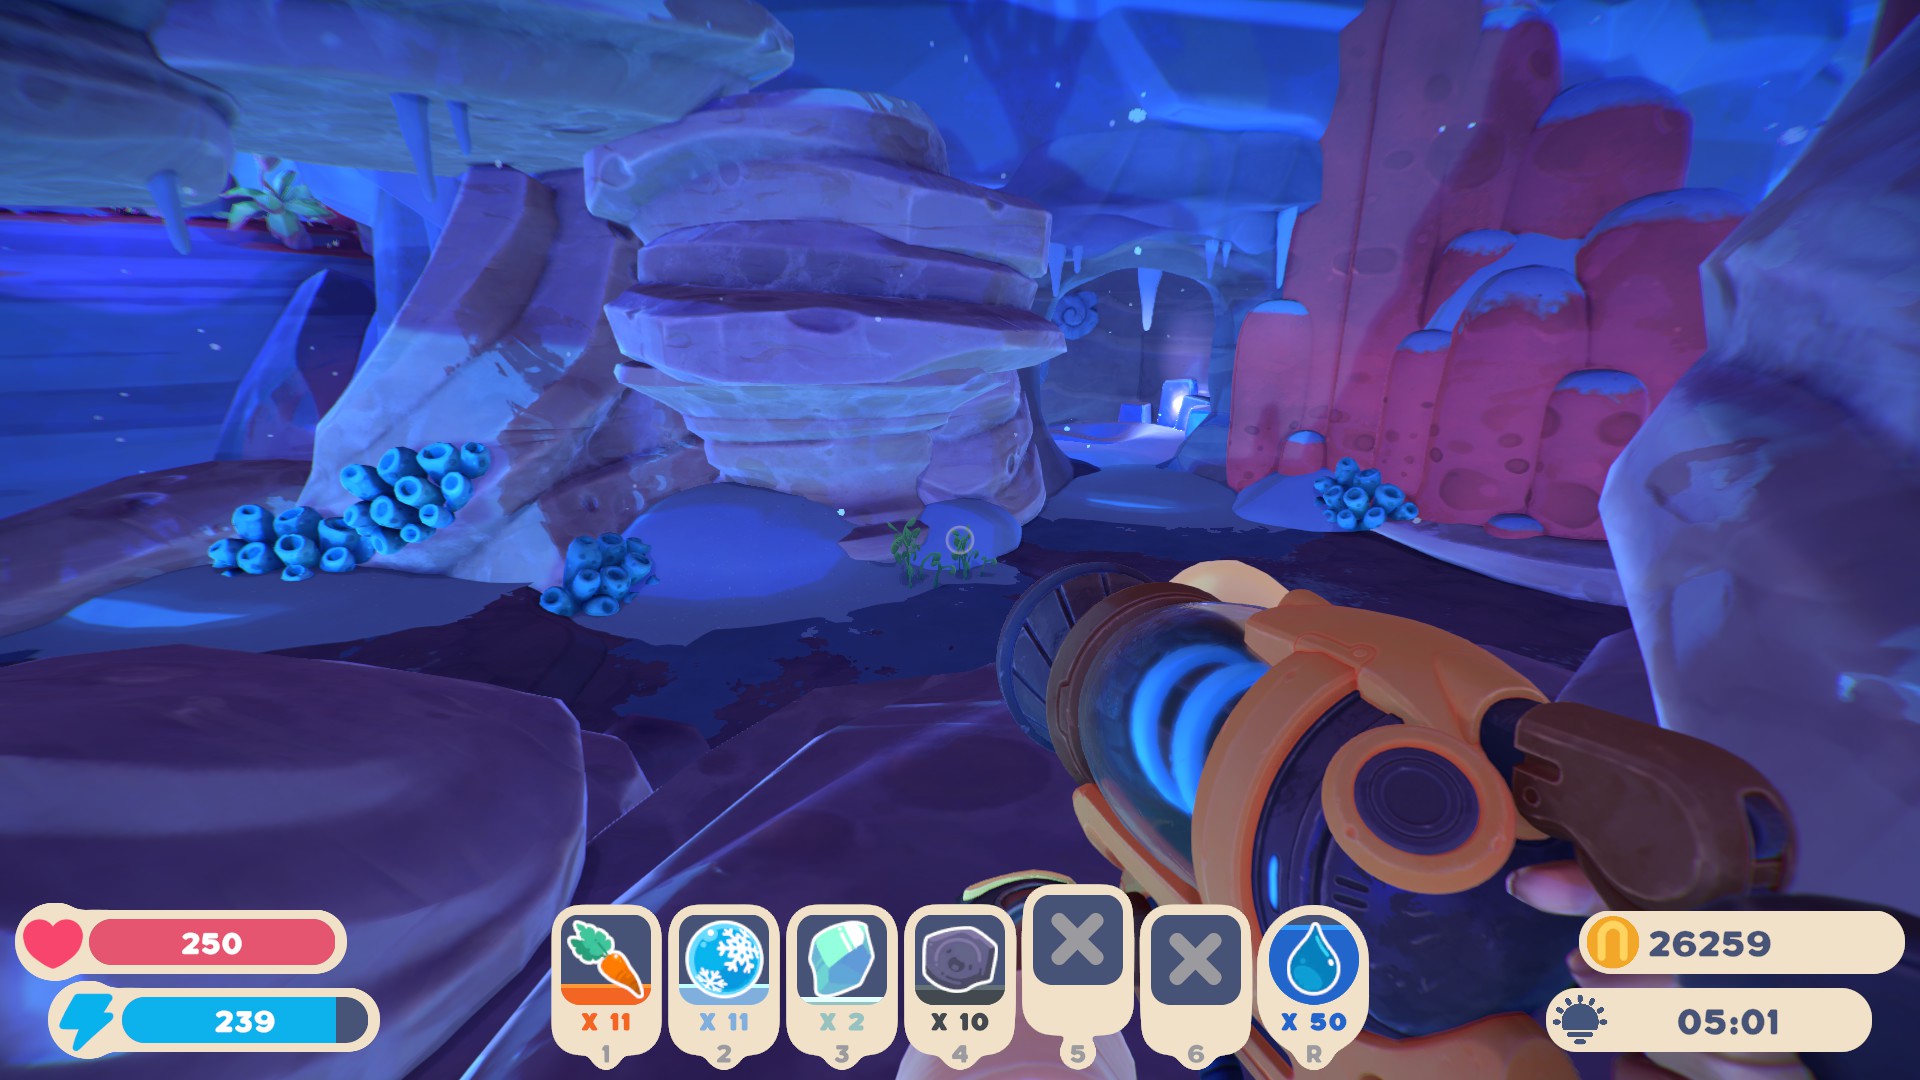 Slime Rancher 2 - Capsule Locations for Powderfall Bluffs - Pods 7 - 12 (Underground) - 6C8C6A2